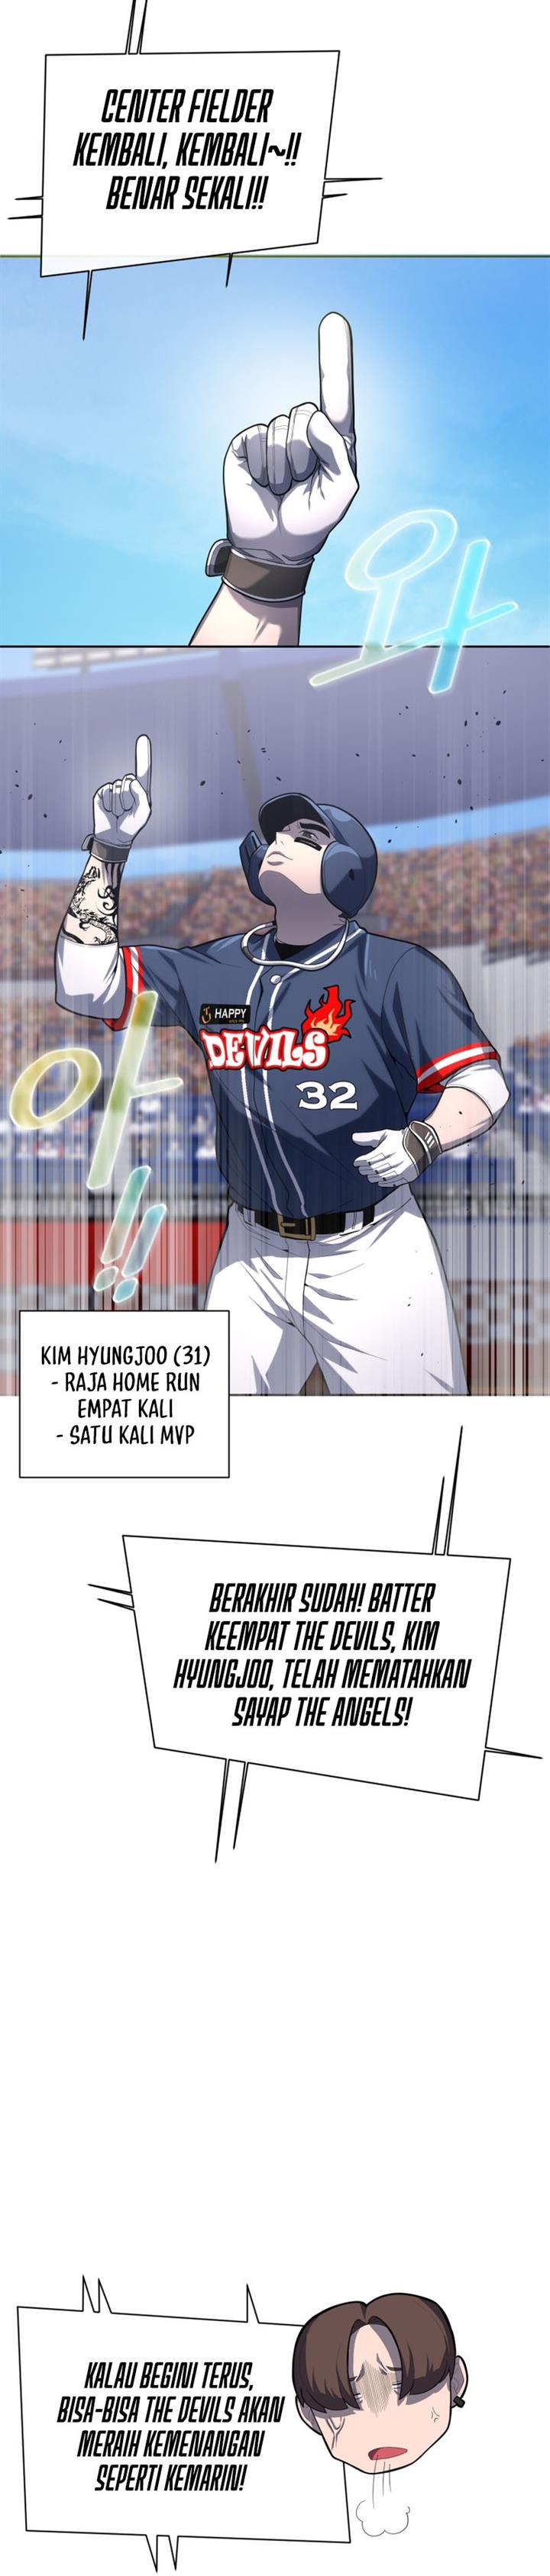 King of The Mound Chapter 23